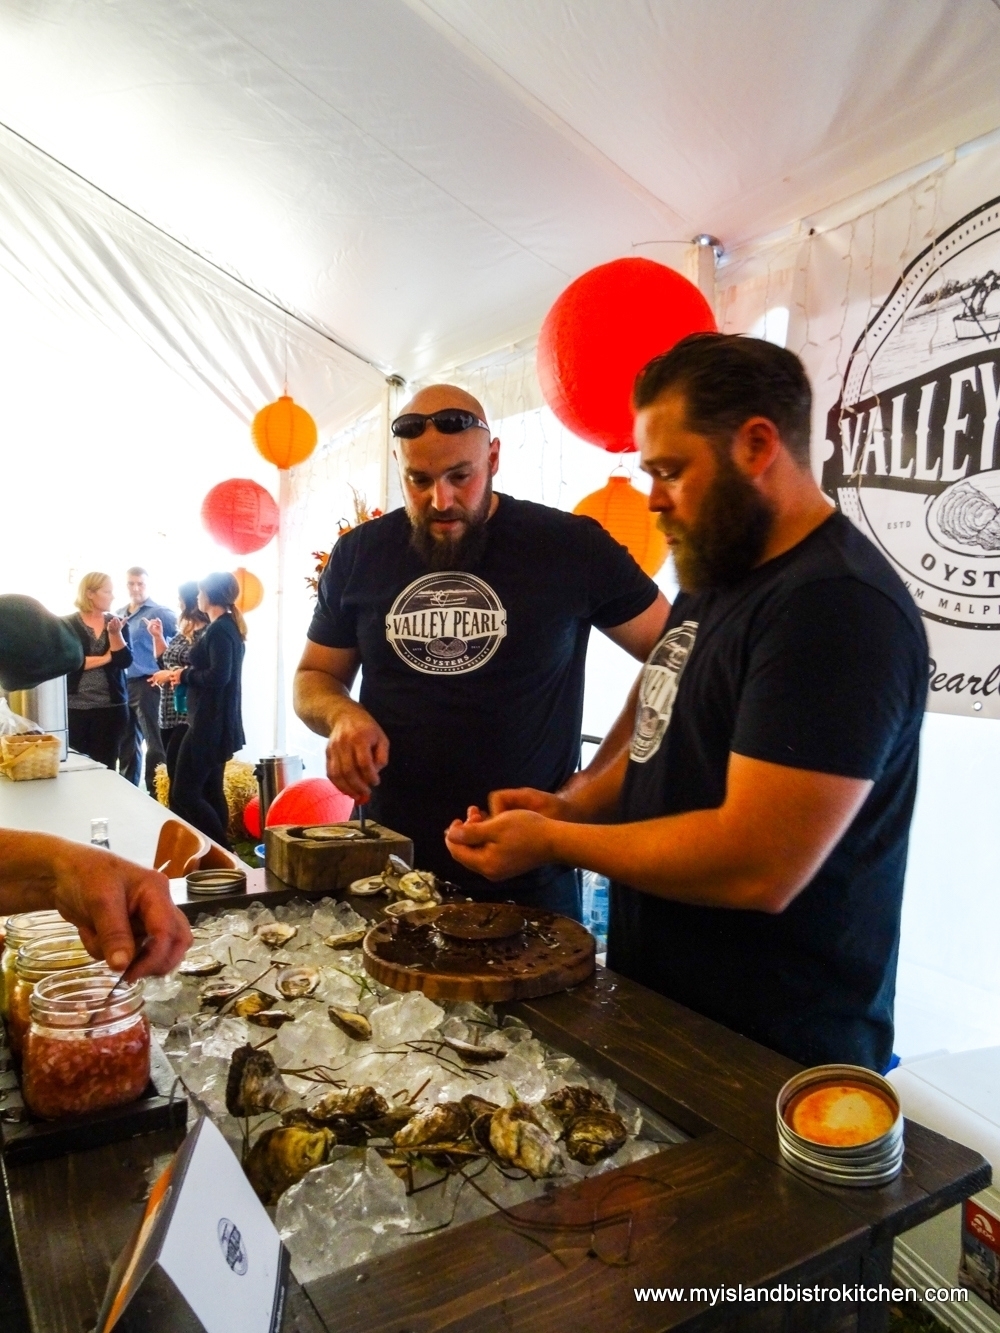 Shucking Oysters at "Taste of Tyne Valley" Event 2017